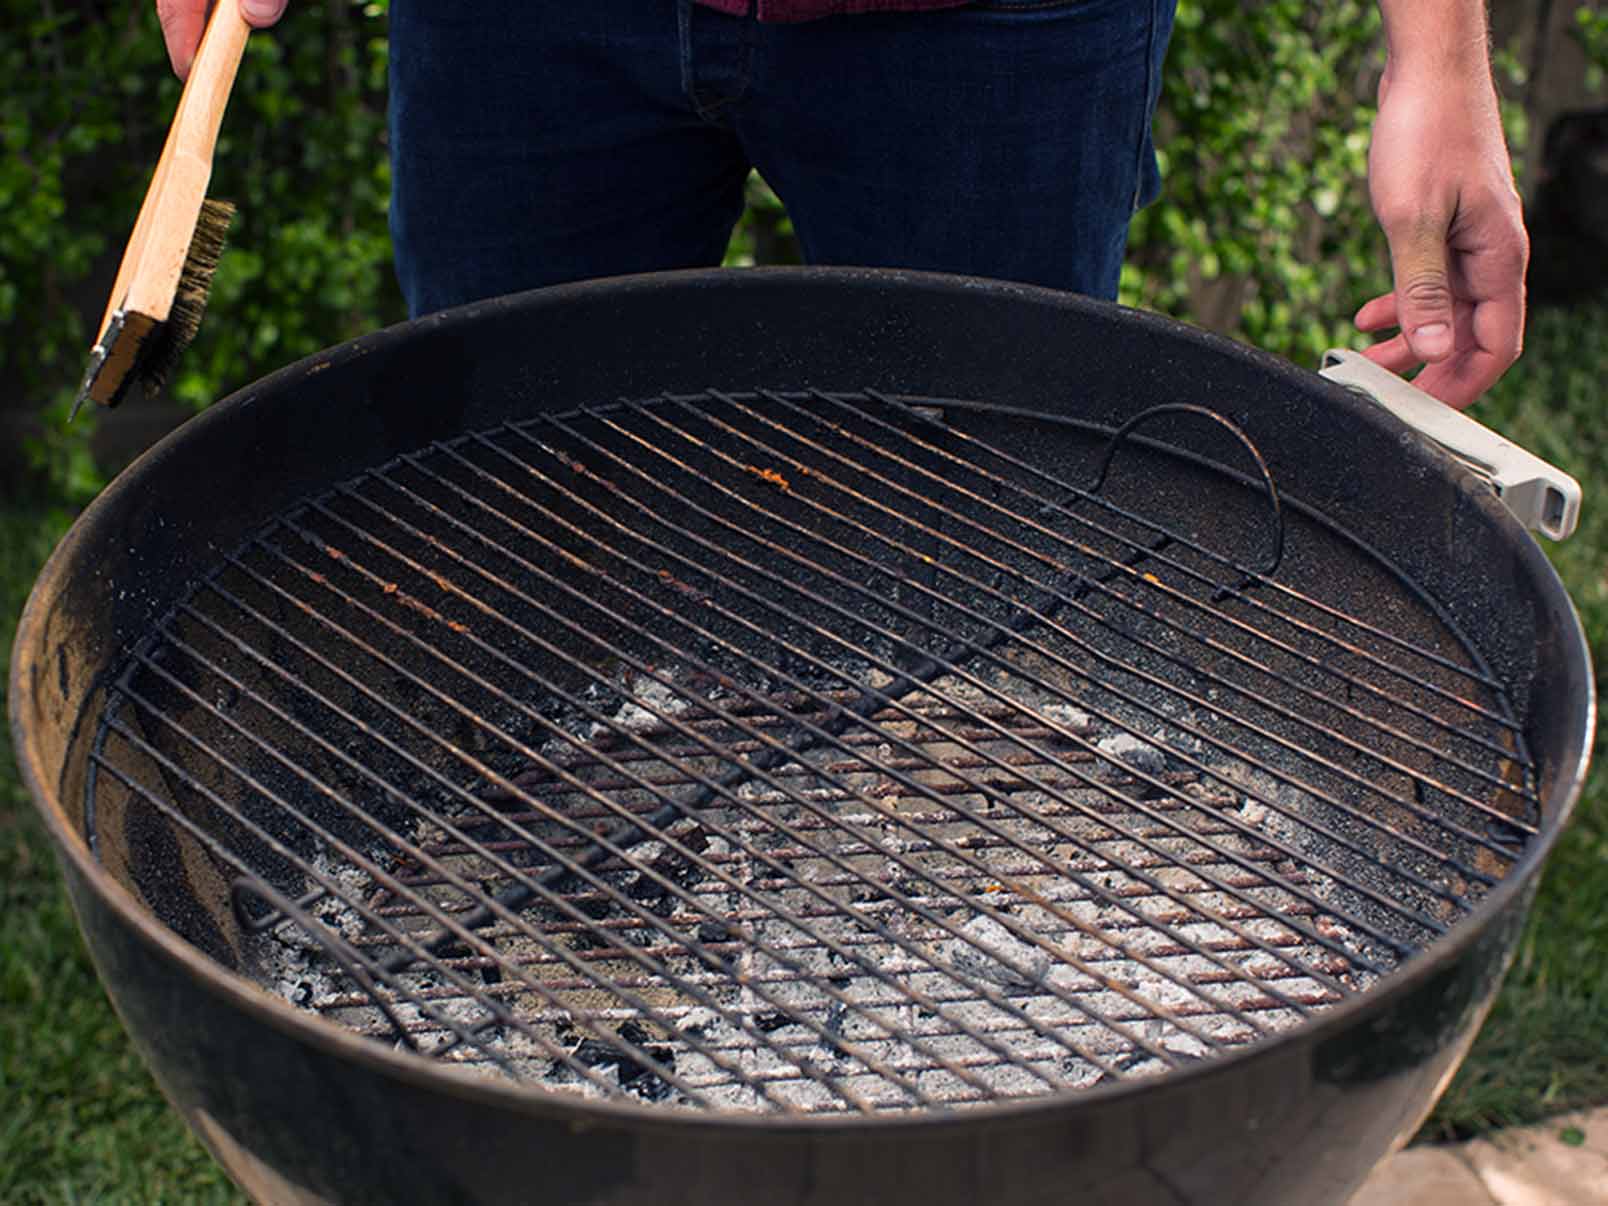 https://www.kingsford.com/wp-content/uploads/2023/04/How-to-Prep-Grill-2-1608.jpg